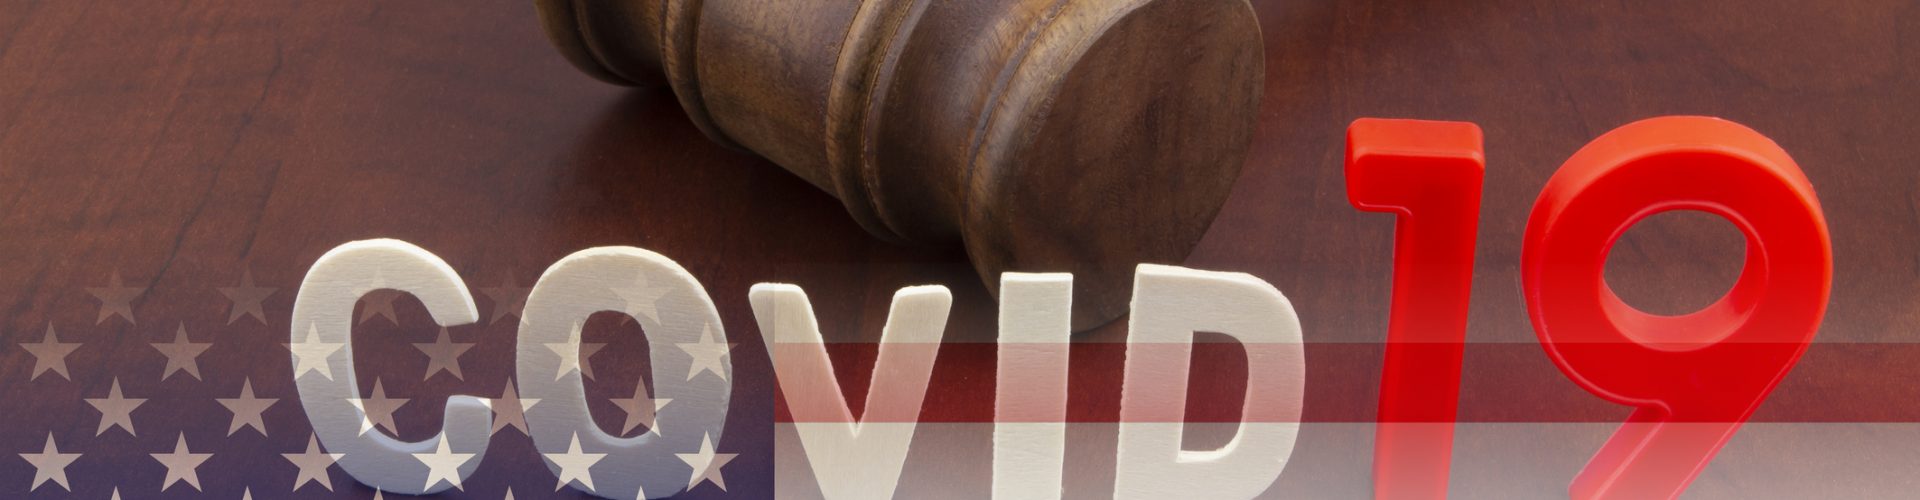 Wooden judge gavel with letters covid19 on table and usa flag. Concept of quarantine and law against covid-19.